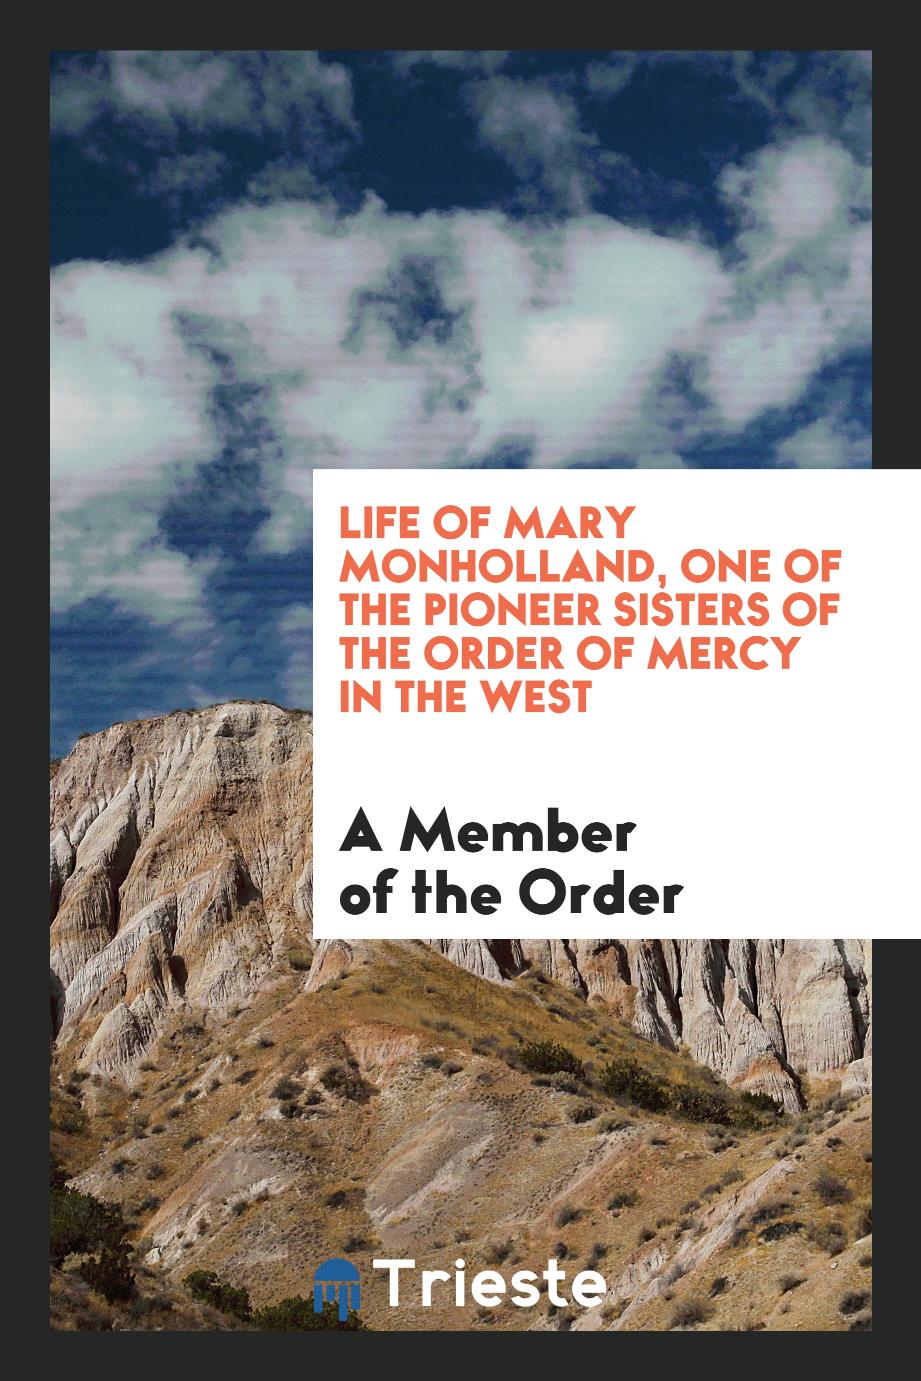 Life of Mary Monholland, One of the Pioneer Sisters of the Order of Mercy in the West